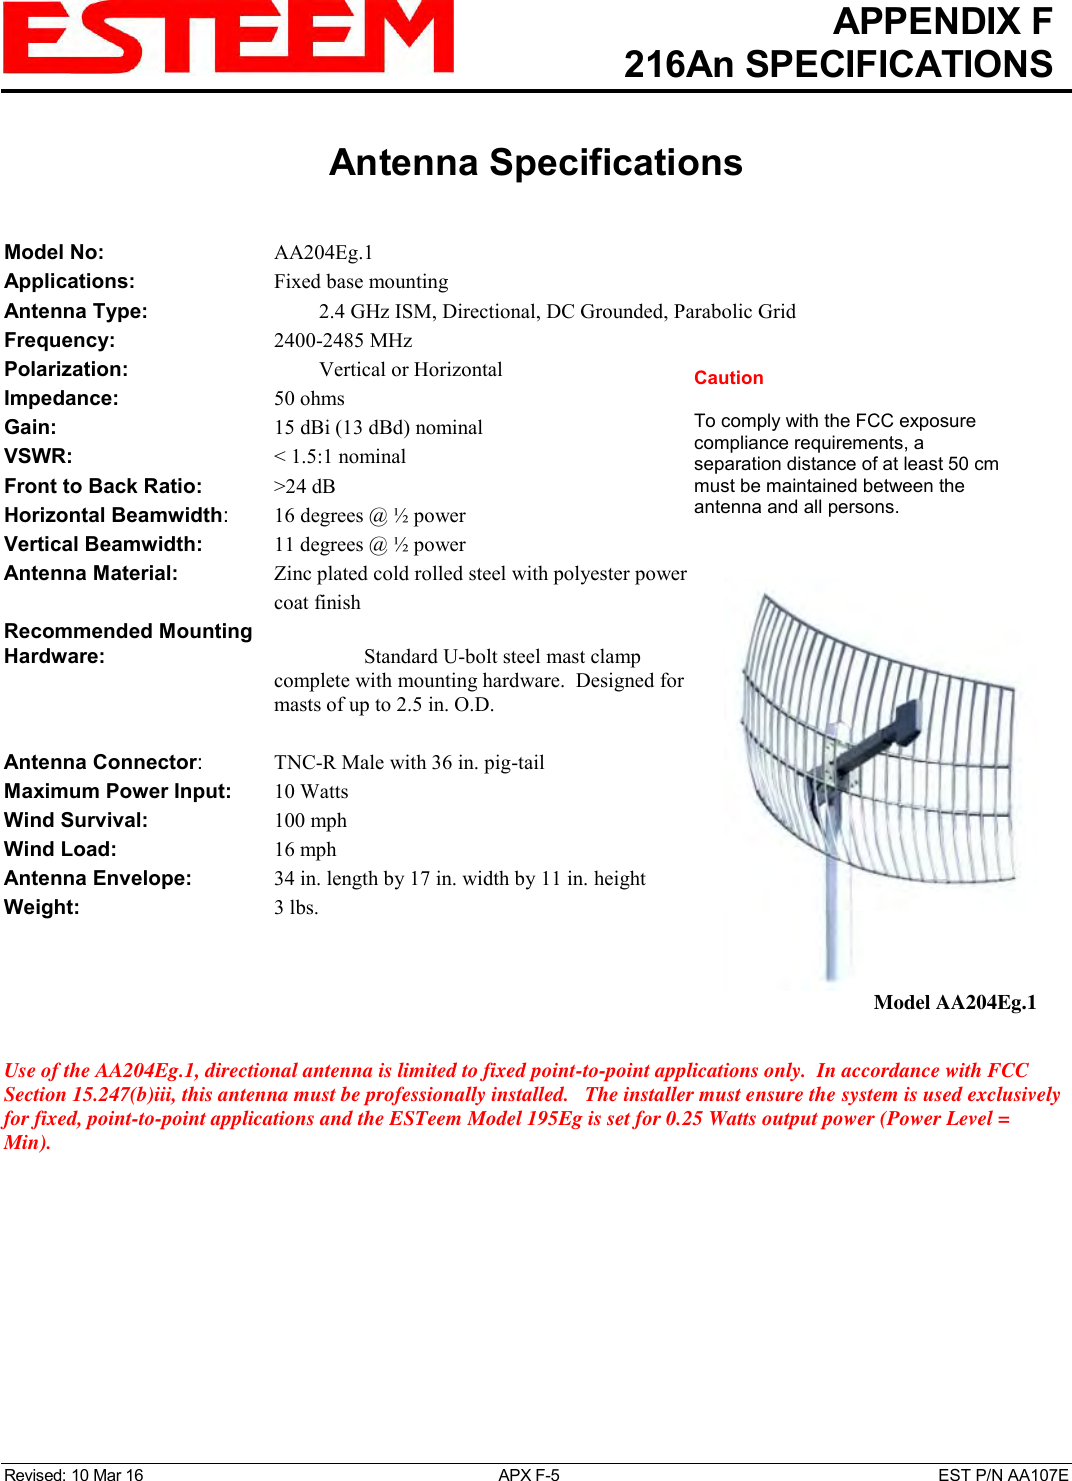   APPENDIX F   216An SPECIFICATIONS   Antenna Specifications   Revised: 10 Mar 16  APX F-5  EST P/N AA107E Model No:        AA204Eg.1 Applications:       Fixed base mounting  Antenna Type:    2.4 GHz ISM, Directional, DC Grounded, Parabolic Grid Frequency:        2400-2485 MHz Polarization:        Vertical or Horizontal Impedance:        50 ohms Gain:          15 dBi (13 dBd) nominal VSWR:           &lt; 1.5:1 nominal  Front to Back Ratio:     &gt;24 dB Horizontal Beamwidth:   16 degrees @ ½ power Vertical Beamwidth:      11 degrees @ ½ power Antenna Material:   Zinc plated cold rolled steel with polyester power coat finish Recommended Mounting  Hardware:      Standard U-bolt steel mast clamp complete with mounting hardware.  Designed for masts of up to 2.5 in. O.D.  Antenna Connector:    TNC-R Male with 36 in. pig-tail Maximum Power Input:     10 Watts Wind Survival:        100 mph Wind Load:          16 mph Antenna Envelope:    34 in. length by 17 in. width by 11 in. height Weight:           3 lbs.      Use of the AA204Eg.1, directional antenna is limited to fixed point-to-point applications only.  In accordance with FCC Section 15.247(b)iii, this antenna must be professionally installed.   The installer must ensure the system is used exclusively for fixed, point-to-point applications and the ESTeem Model 195Eg is set for 0.25 Watts output power (Power Level = Min).    Model AA204Eg.1 Caution  To comply with the FCC exposure compliance requirements, a separation distance of at least 50 cm must be maintained between the antenna and all persons. 